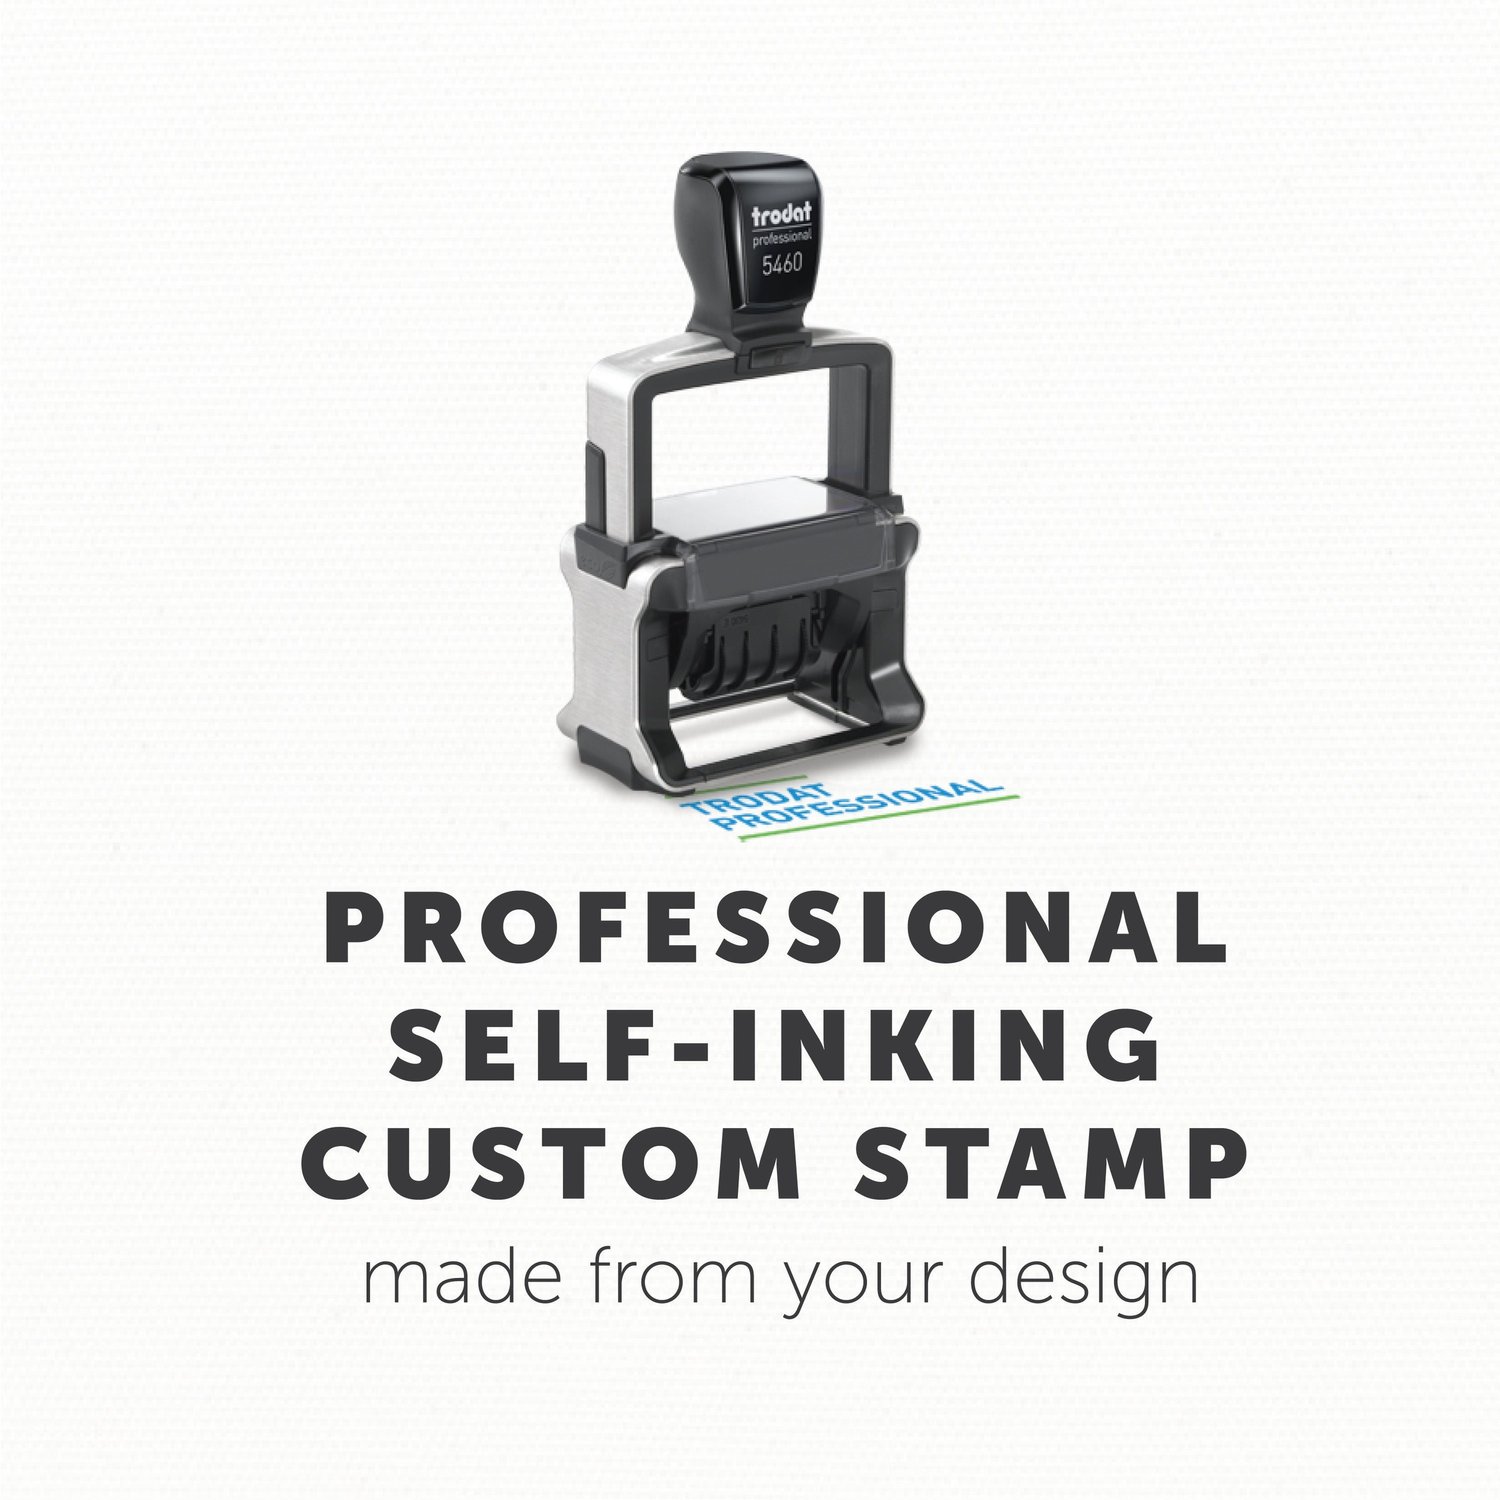 Custom Stamps  Business Stamps with Logos and Lines of Text Tagged Stamp  Type_Self-Inking